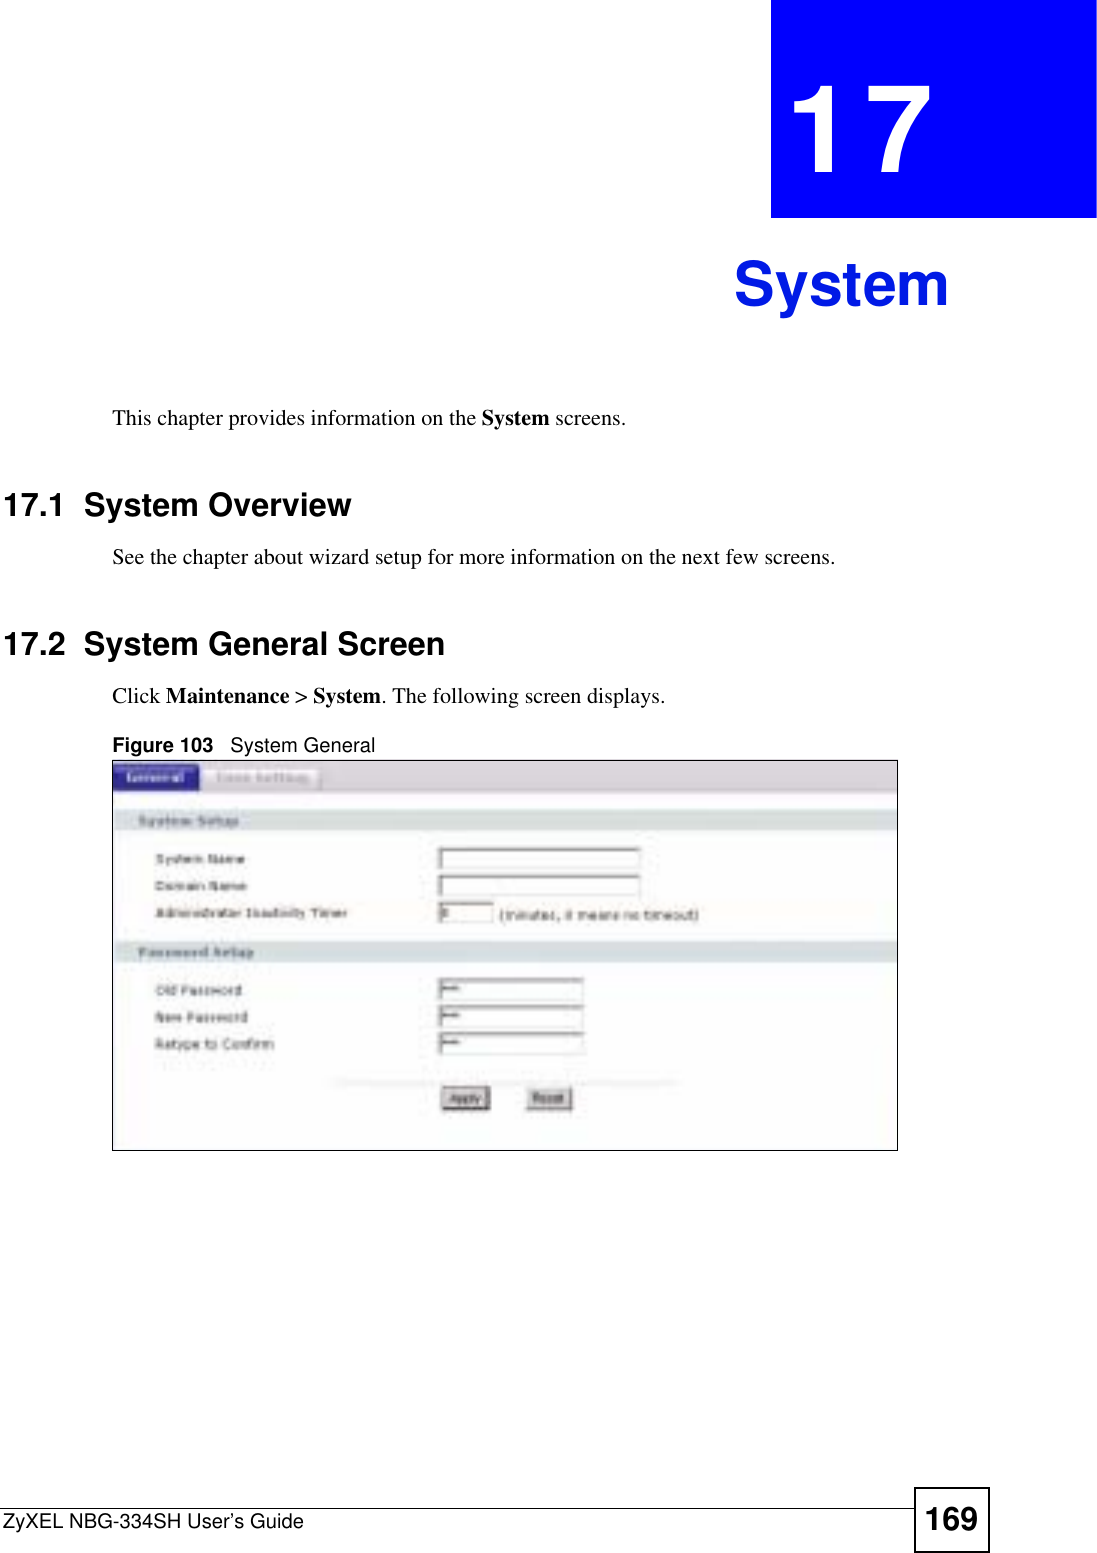 ZyXEL NBG-334SH User’s Guide 169CHAPTER 17SystemThis chapter provides information on the System screens. 17.1  System OverviewSee the chapter about wizard setup for more information on the next few screens.17.2  System General ScreenClick Maintenance &gt; System. The following screen displays.Figure 103   System General 